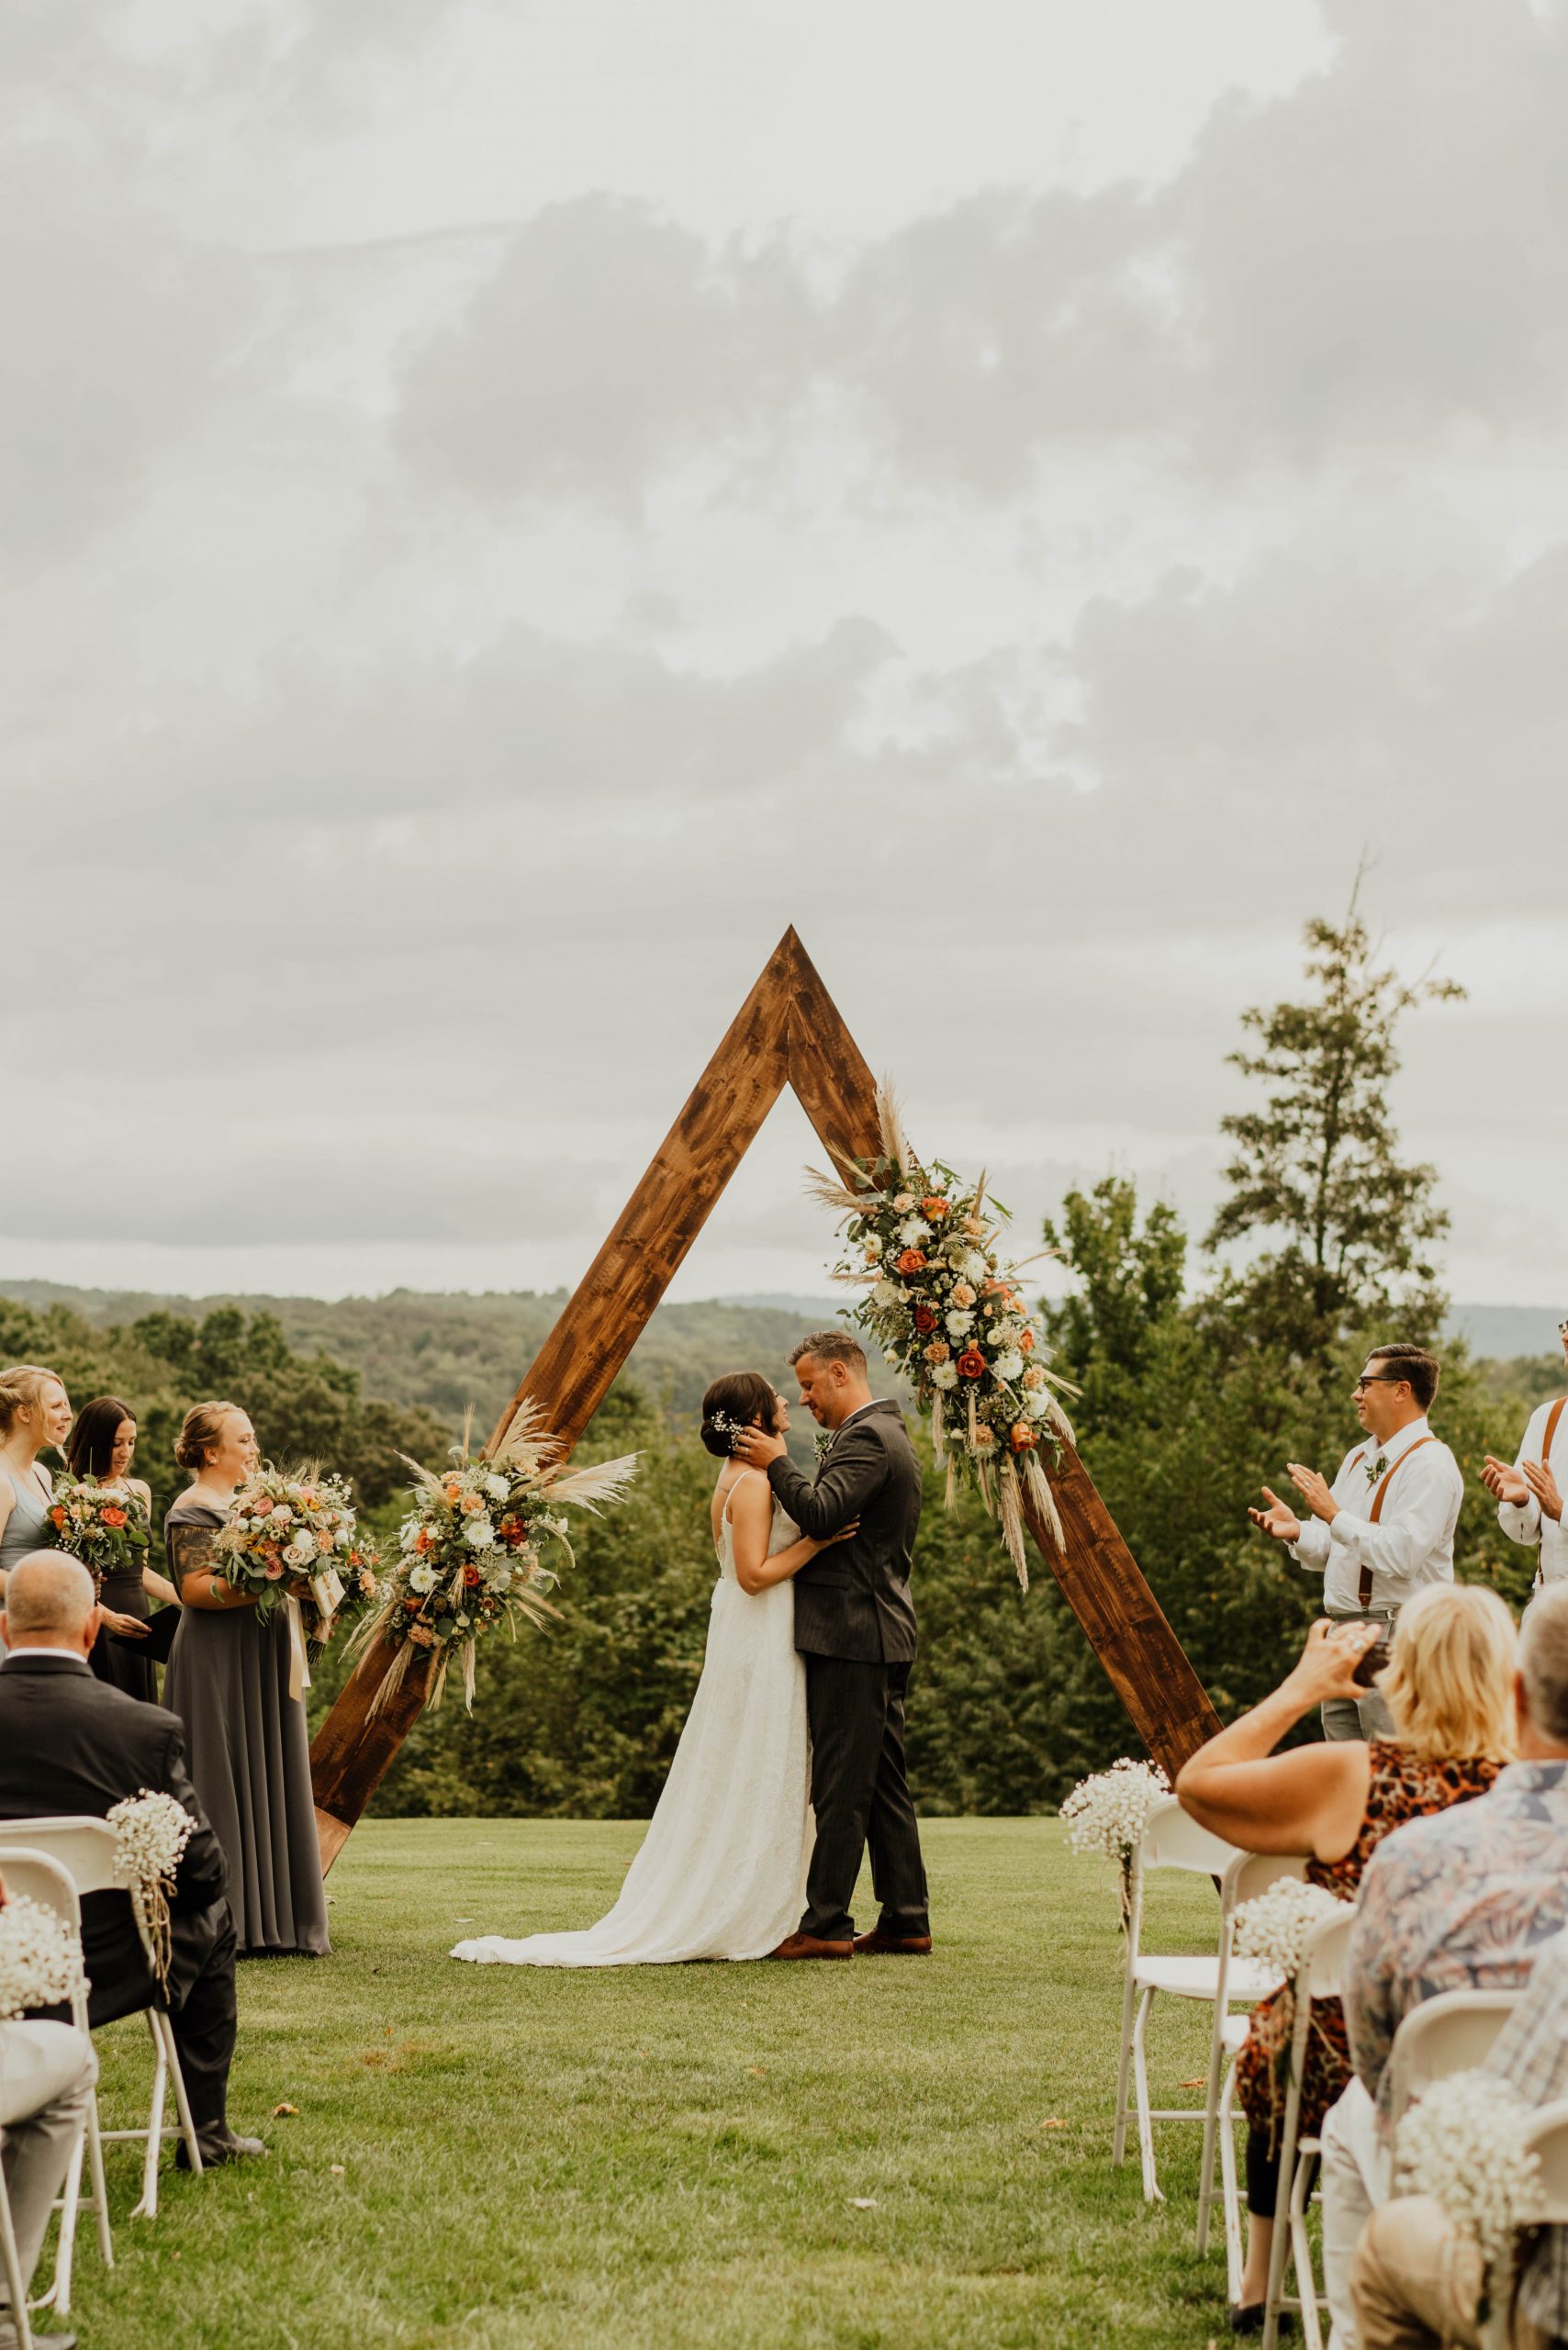 Alex and Phil hosted their boho-style wedding at The Punxsutawney Country club with an outdoor celebration on a warm summer day